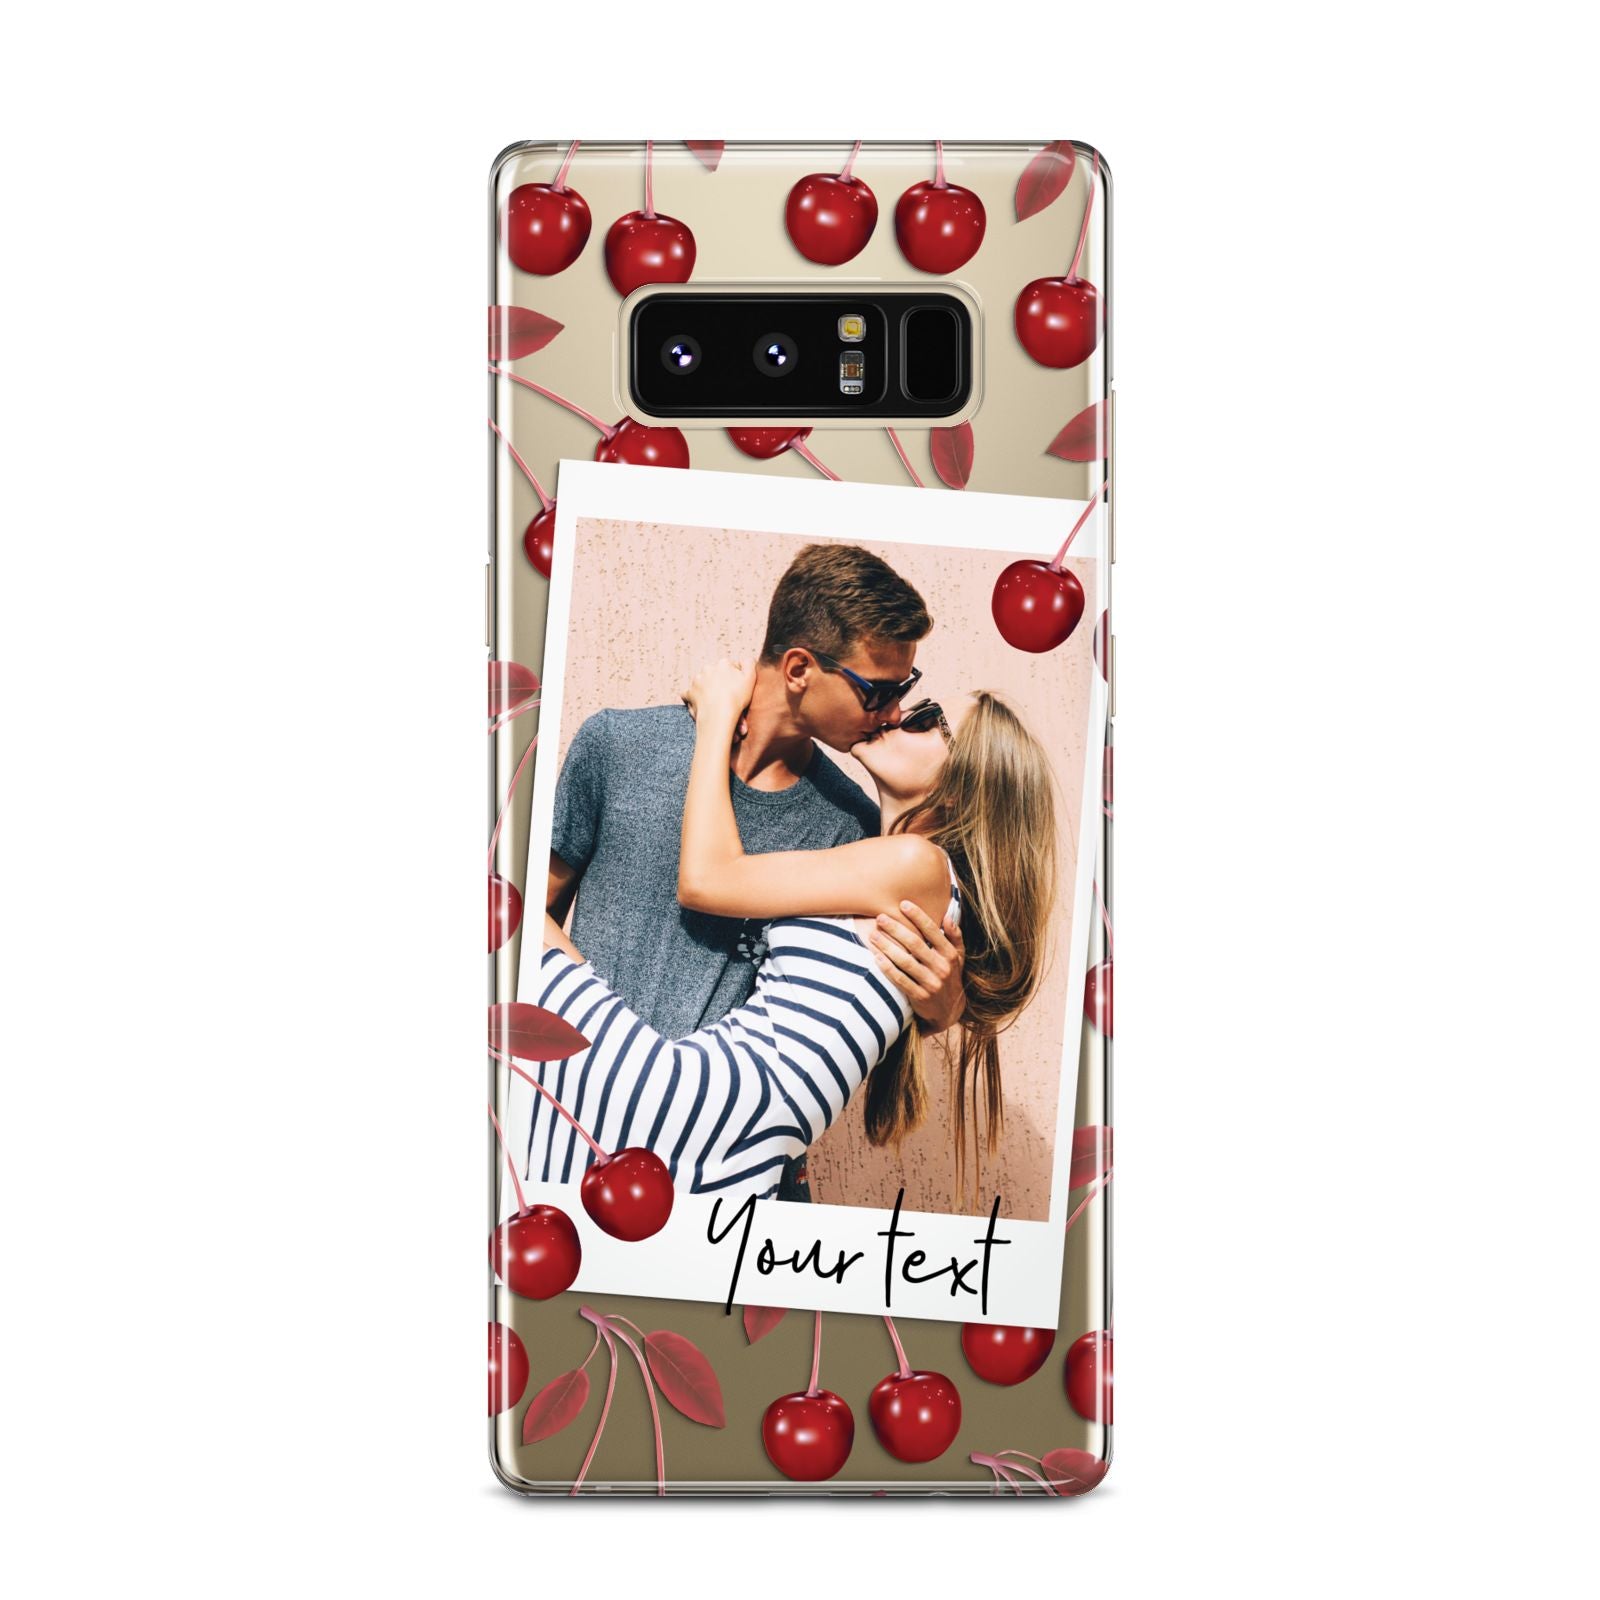 Personalised Photo Cherry Samsung Galaxy Note 8 Case